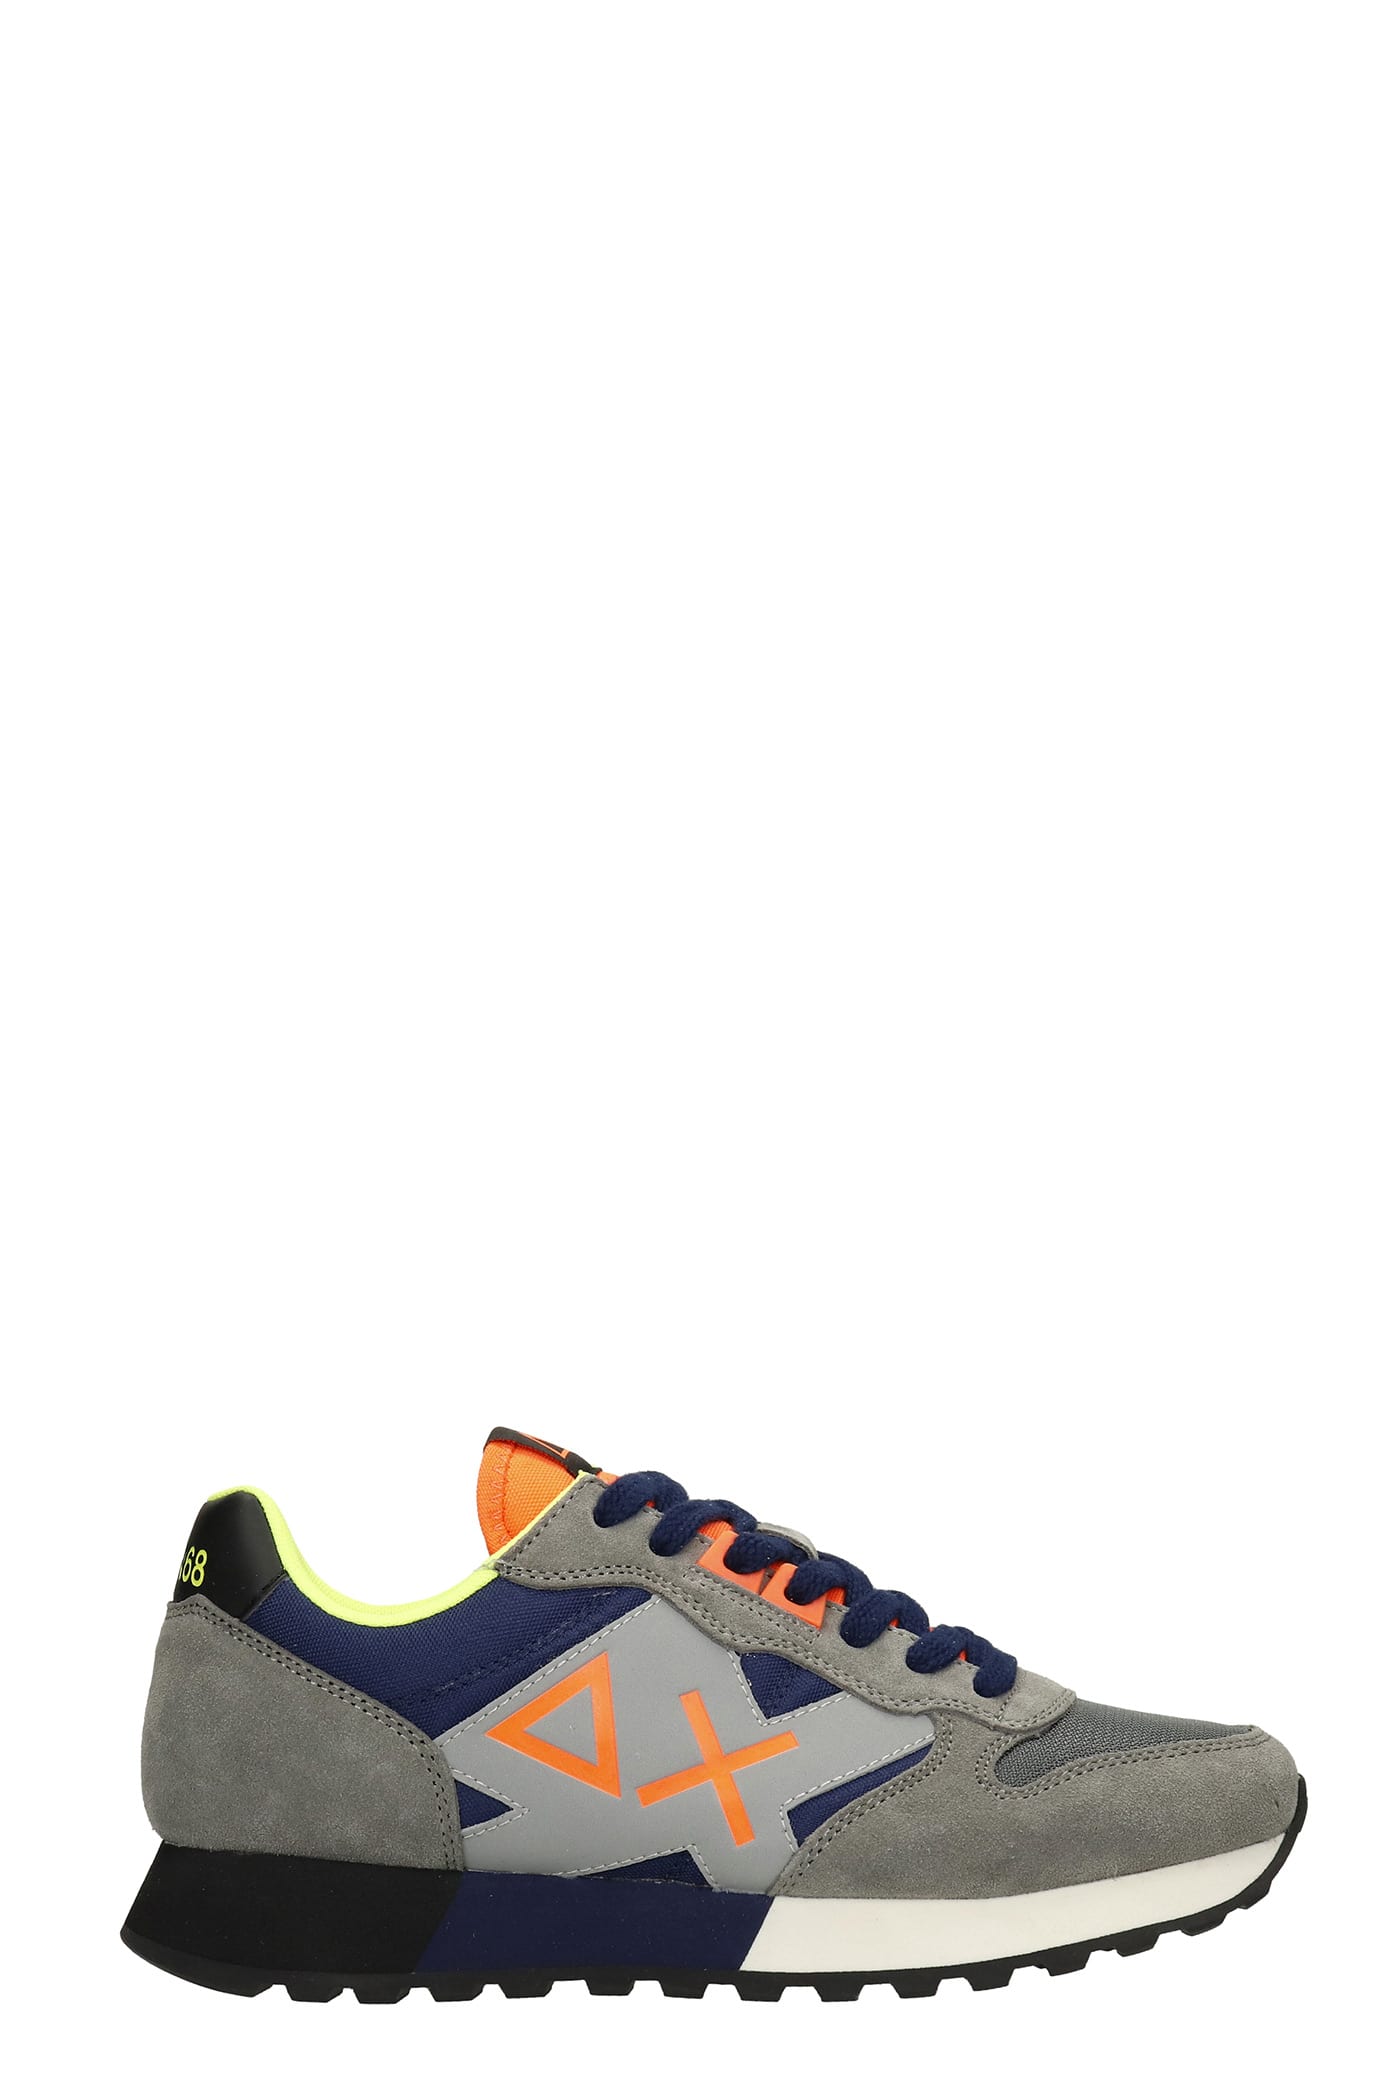 Sun 68 Jaki Fluo Sneakers In Blue Suede And Fabric